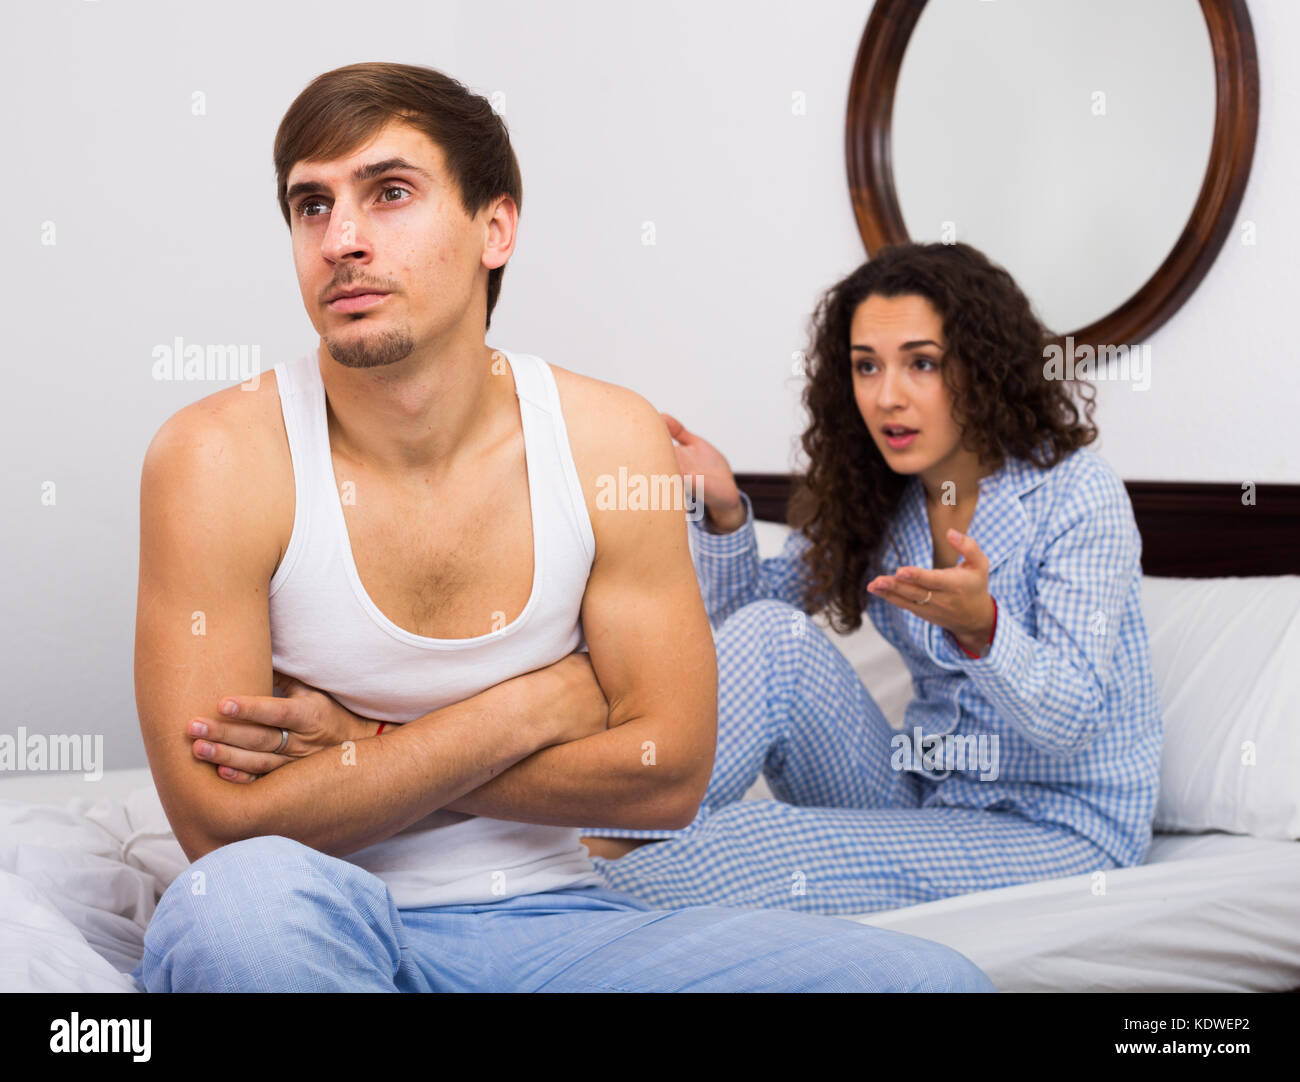 Husband turning away from wife during bad fight in bedroom Stock Photo photo